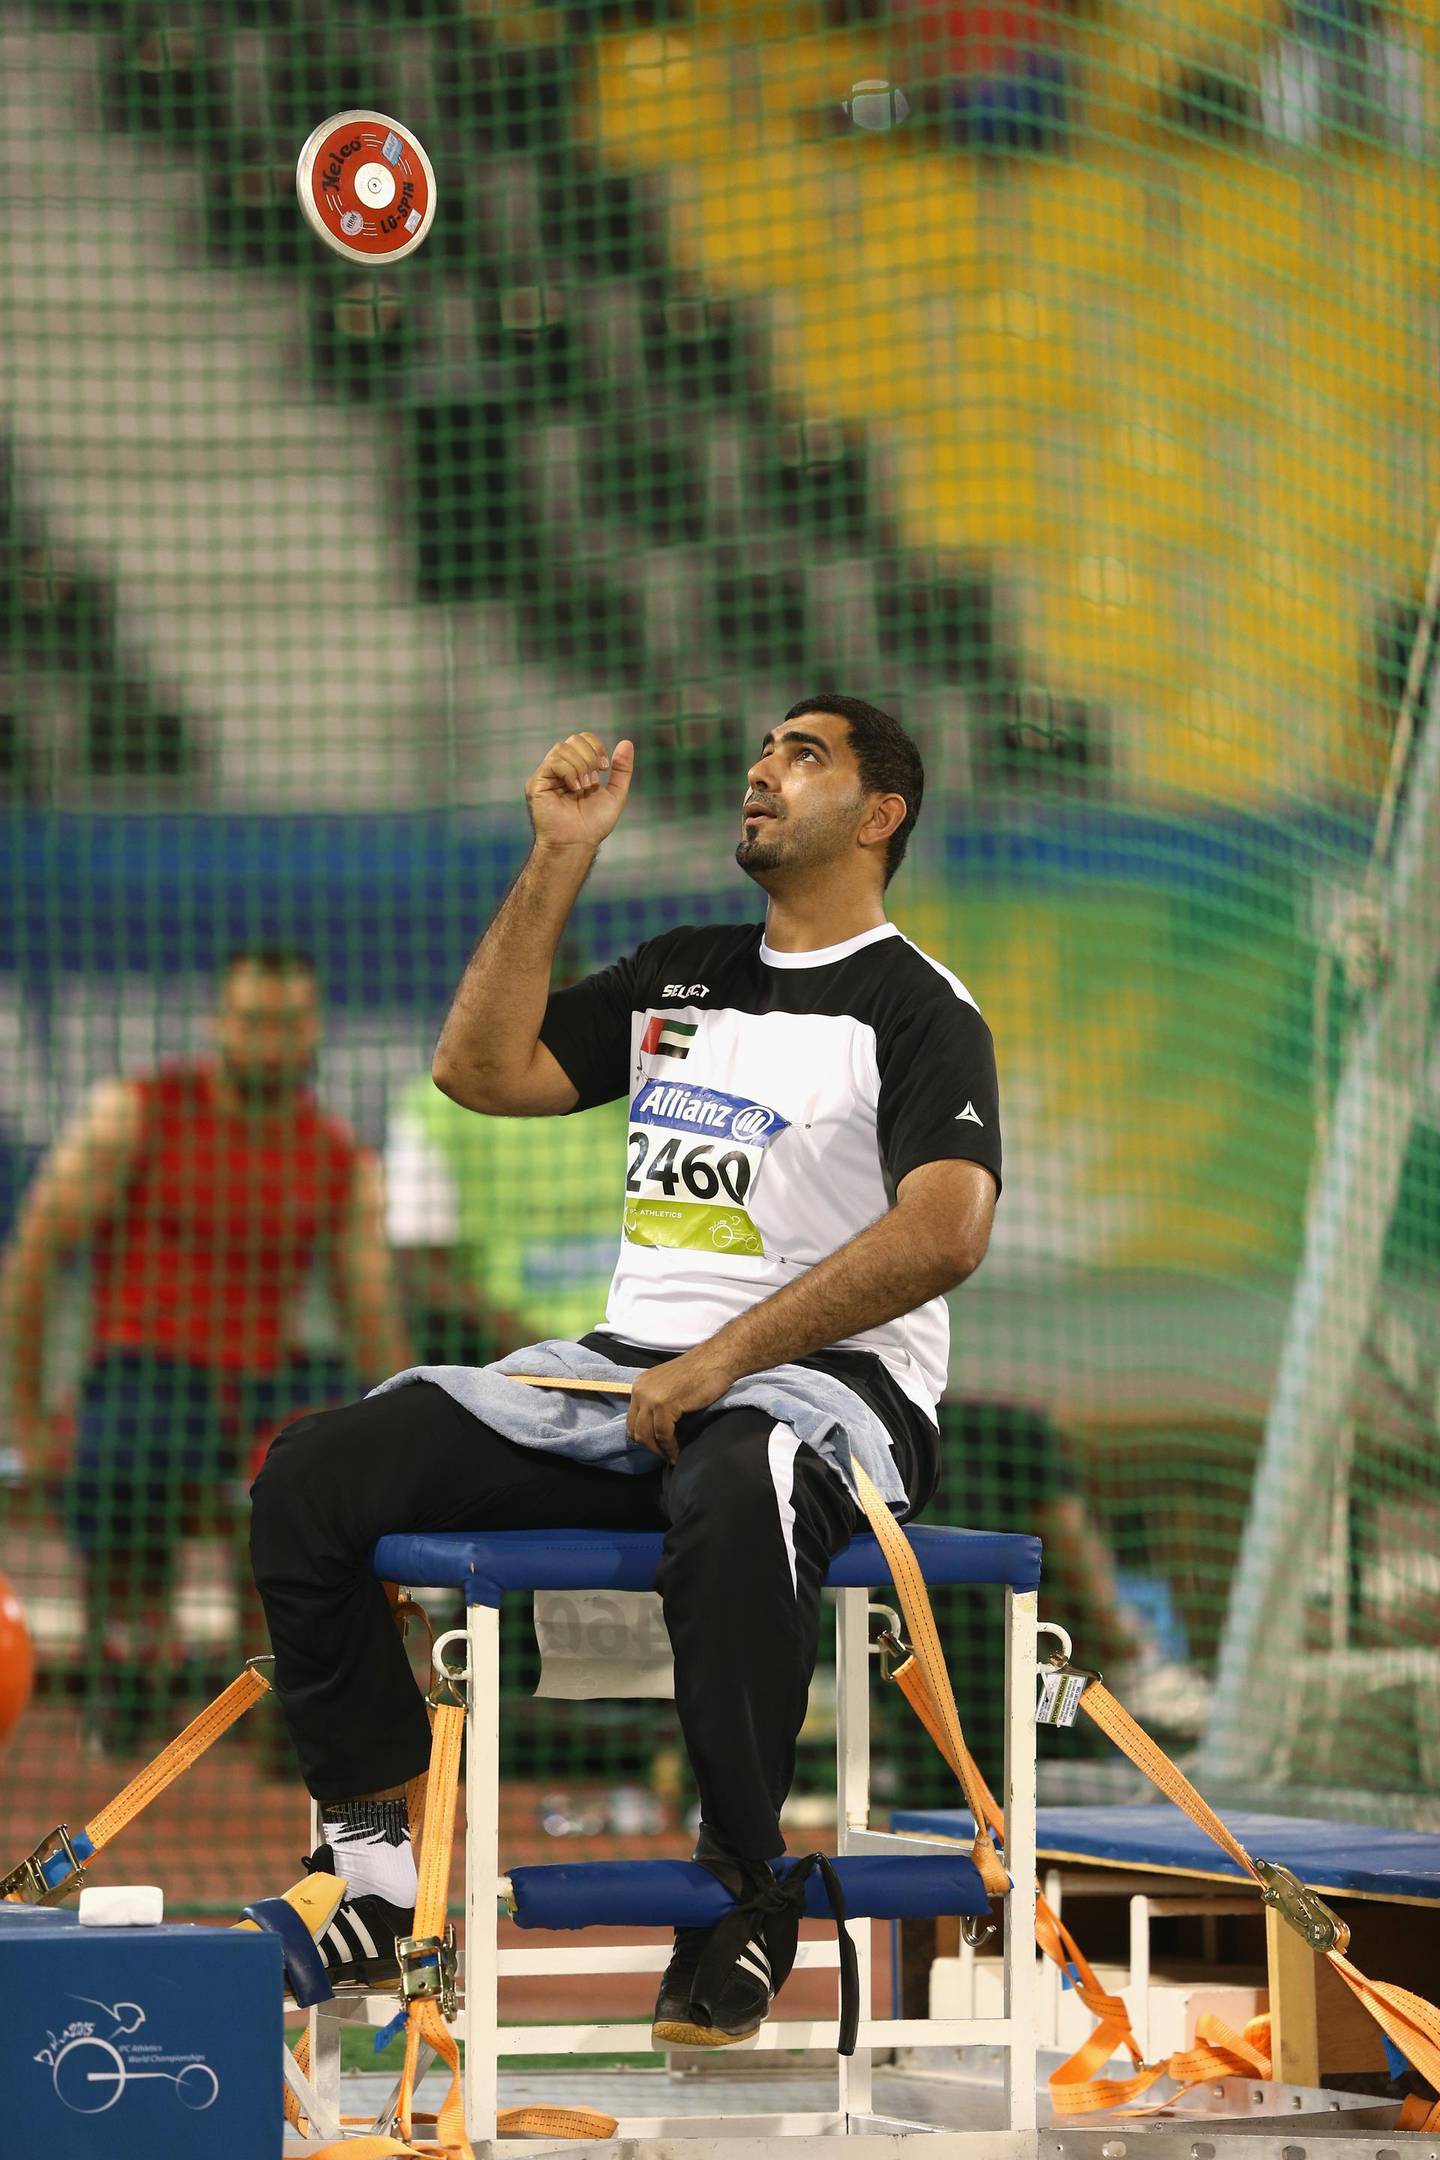 DOHA, QATAR - OCTOBER 31:  Abdullah Hayayei of UAE competes in the men's discus F34 final during the Evening Session on Day Ten of the IPC Athletics World Championships at Suhaim Bin Hamad Stadium on October 31, 2015 in Doha, Qatar.  (Photo by Warren Little/Getty Images)